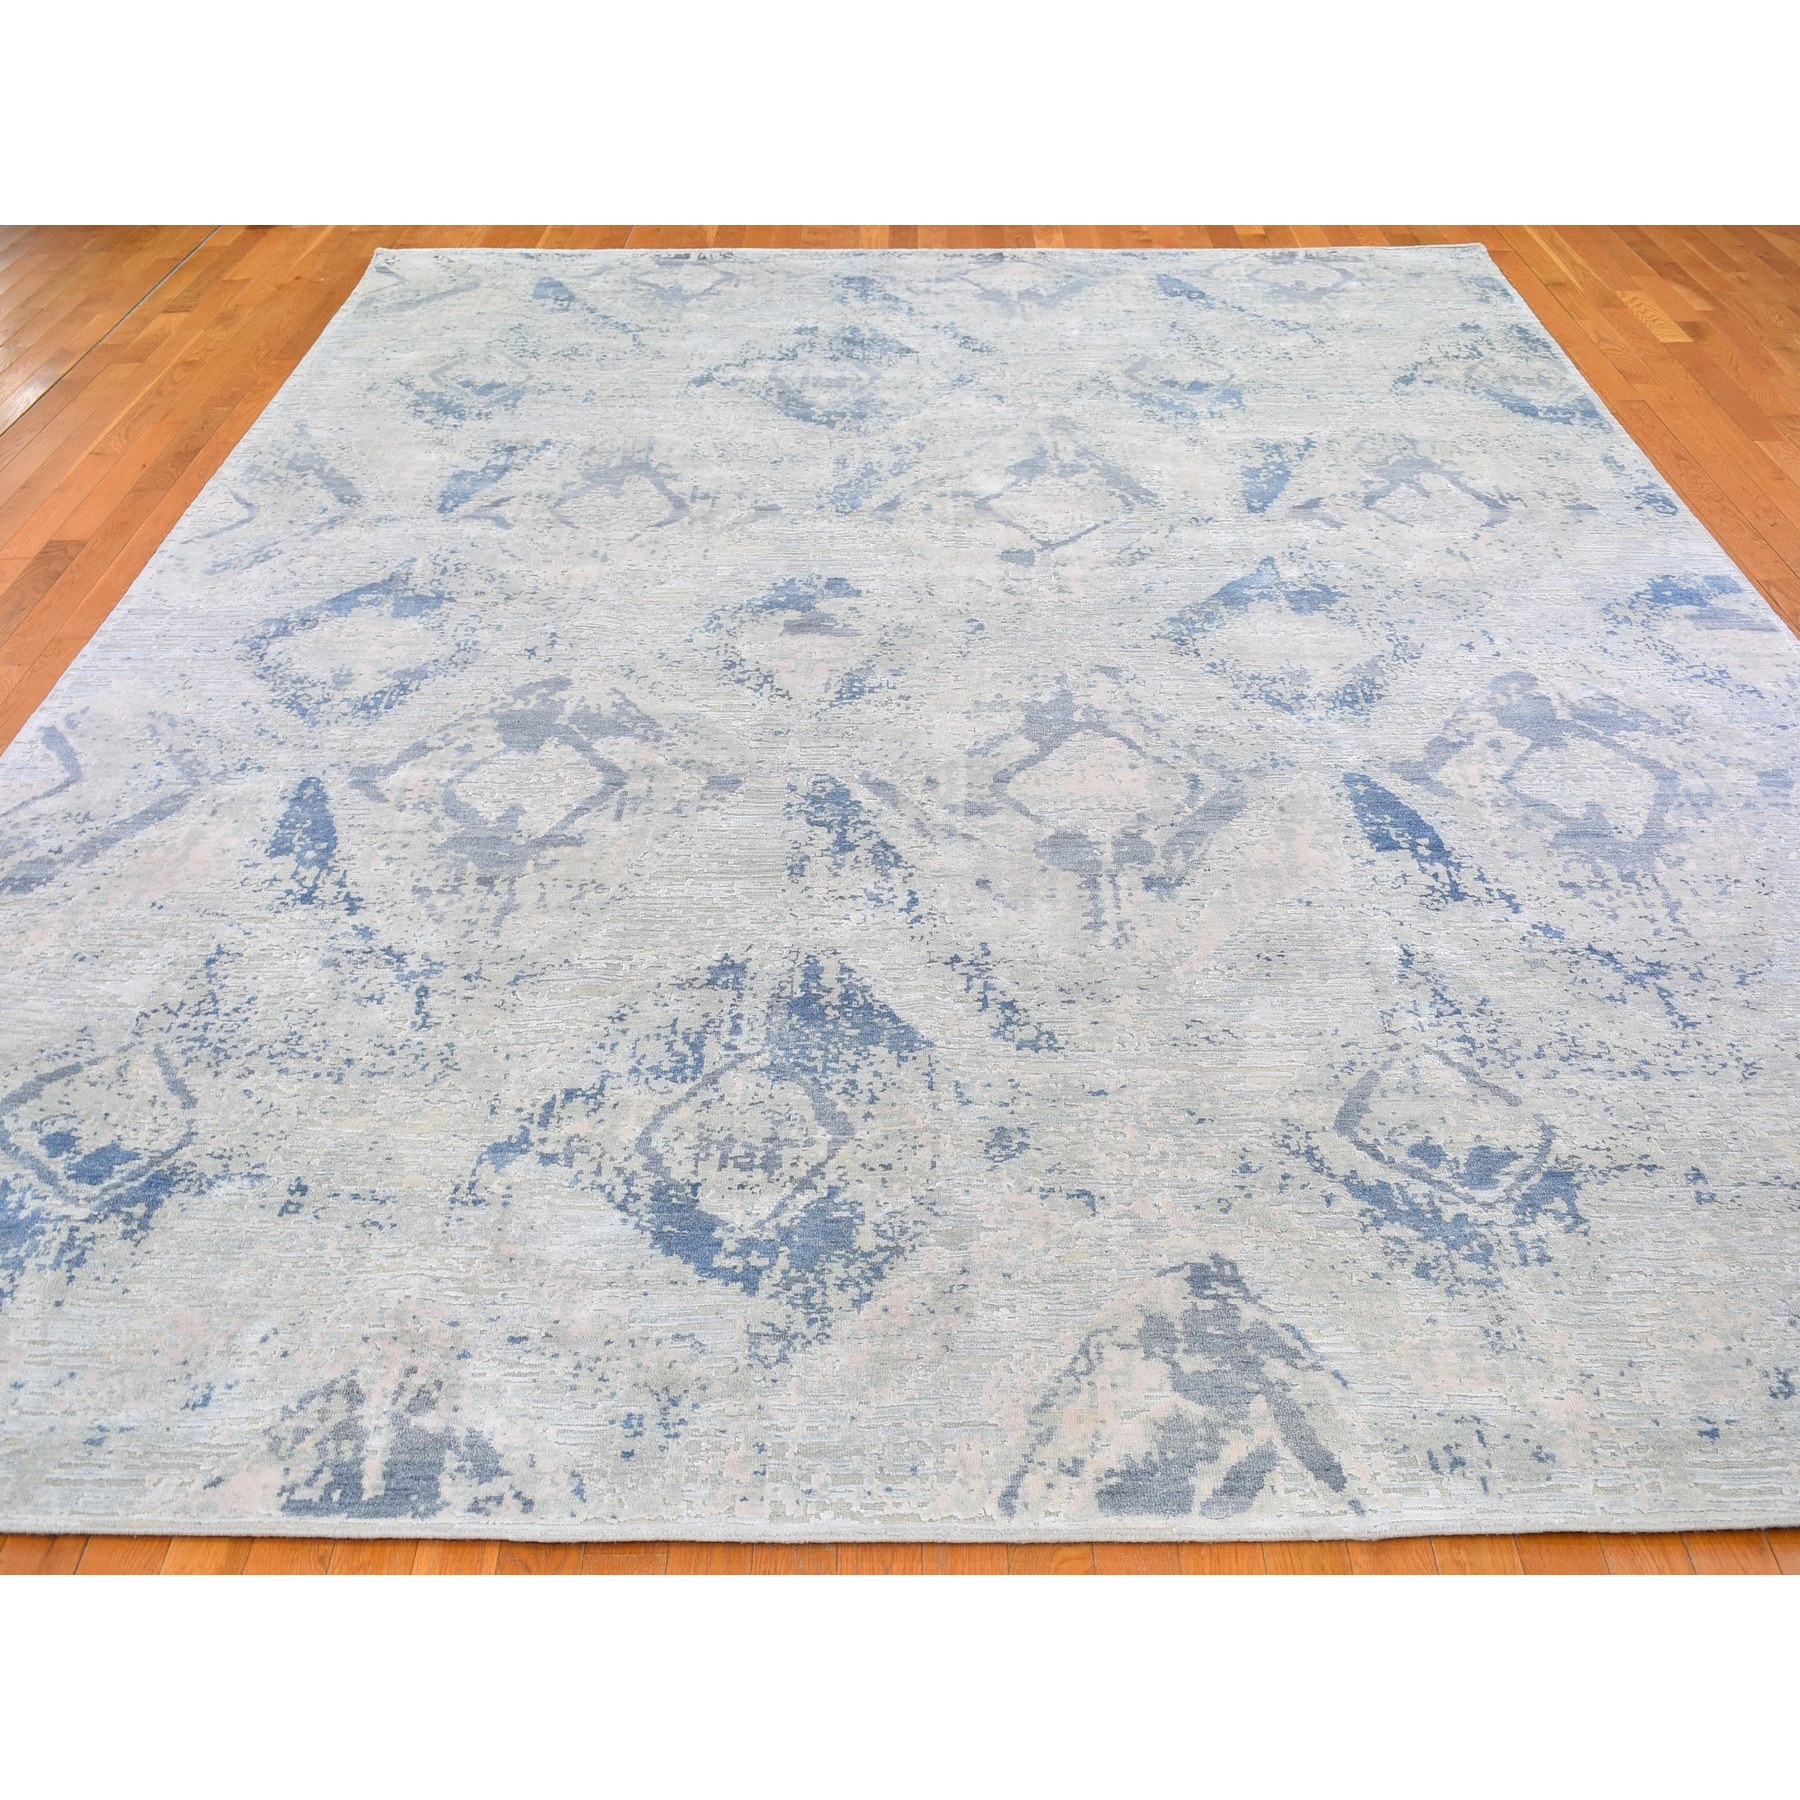 10'x14'3" Ivory Large Elements with Pastels Modern Silk with Textured Wool Hand Woven Oriental Rug 